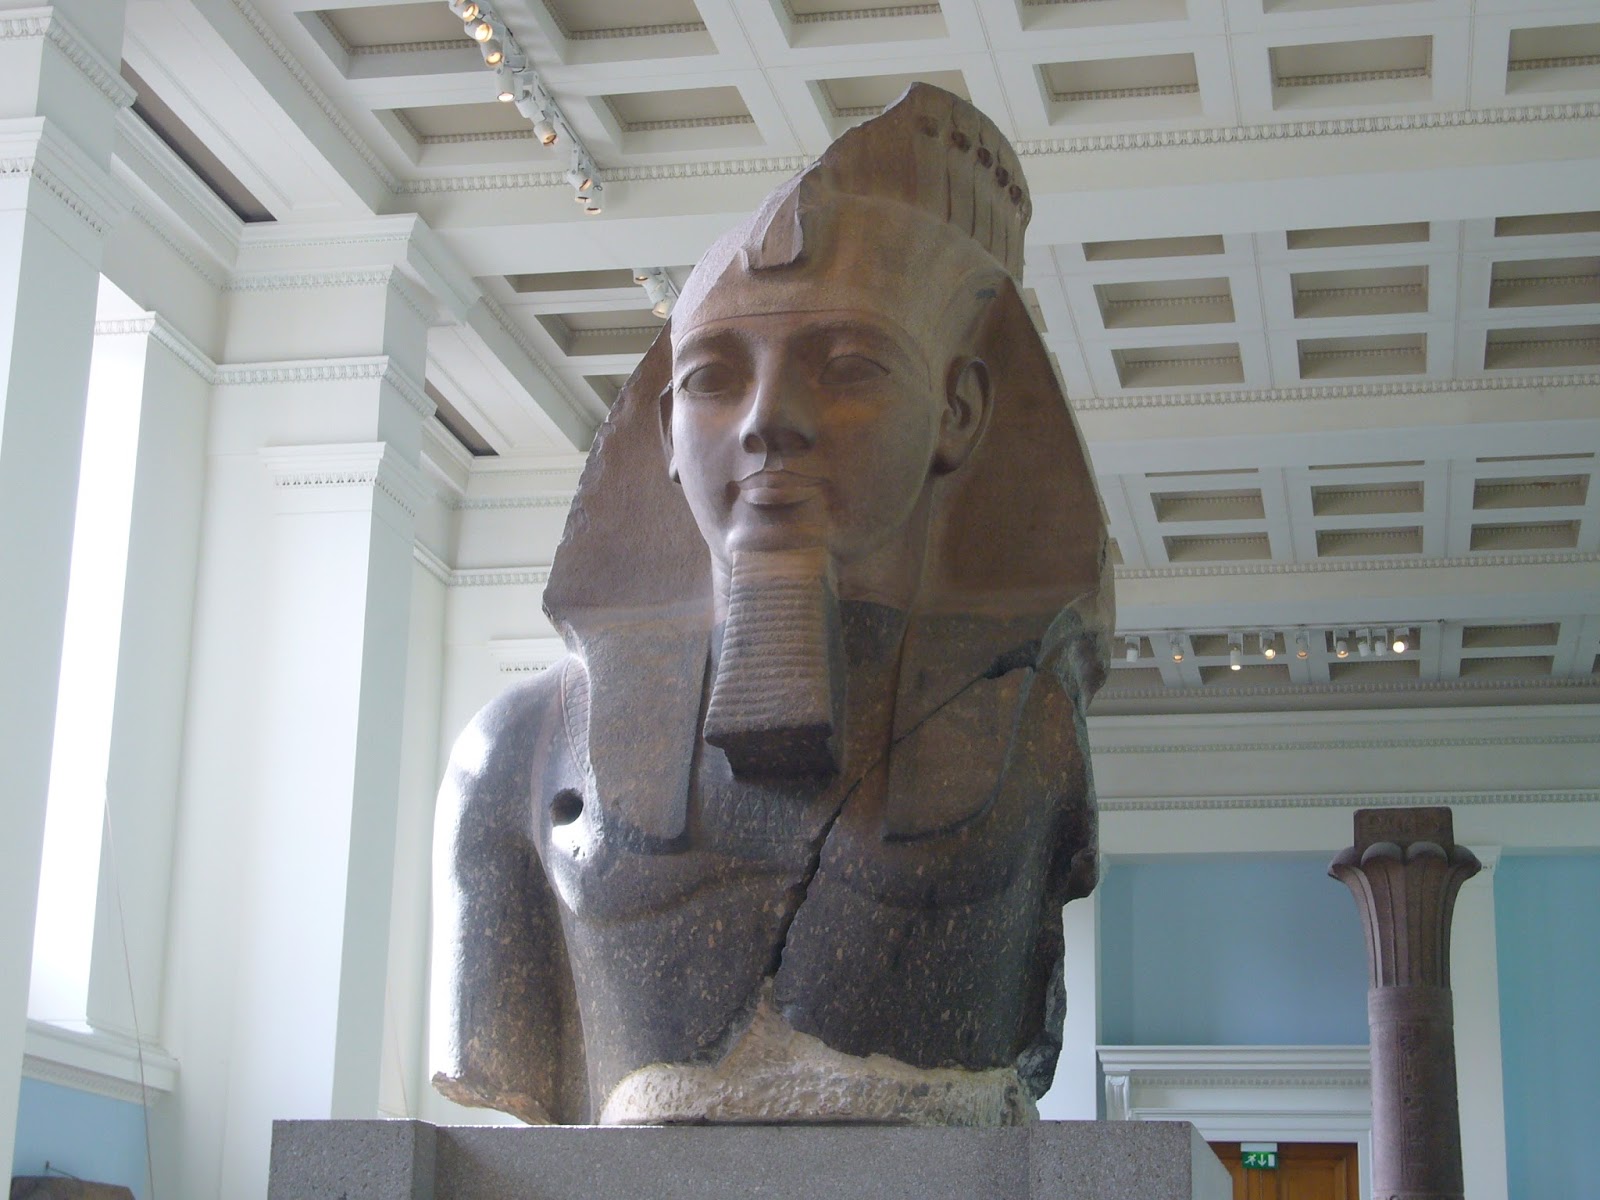 Holmes And Poirot In London ロンドン 大英博物館 ラムセス２世像 British Museum Statue Of Ramesses